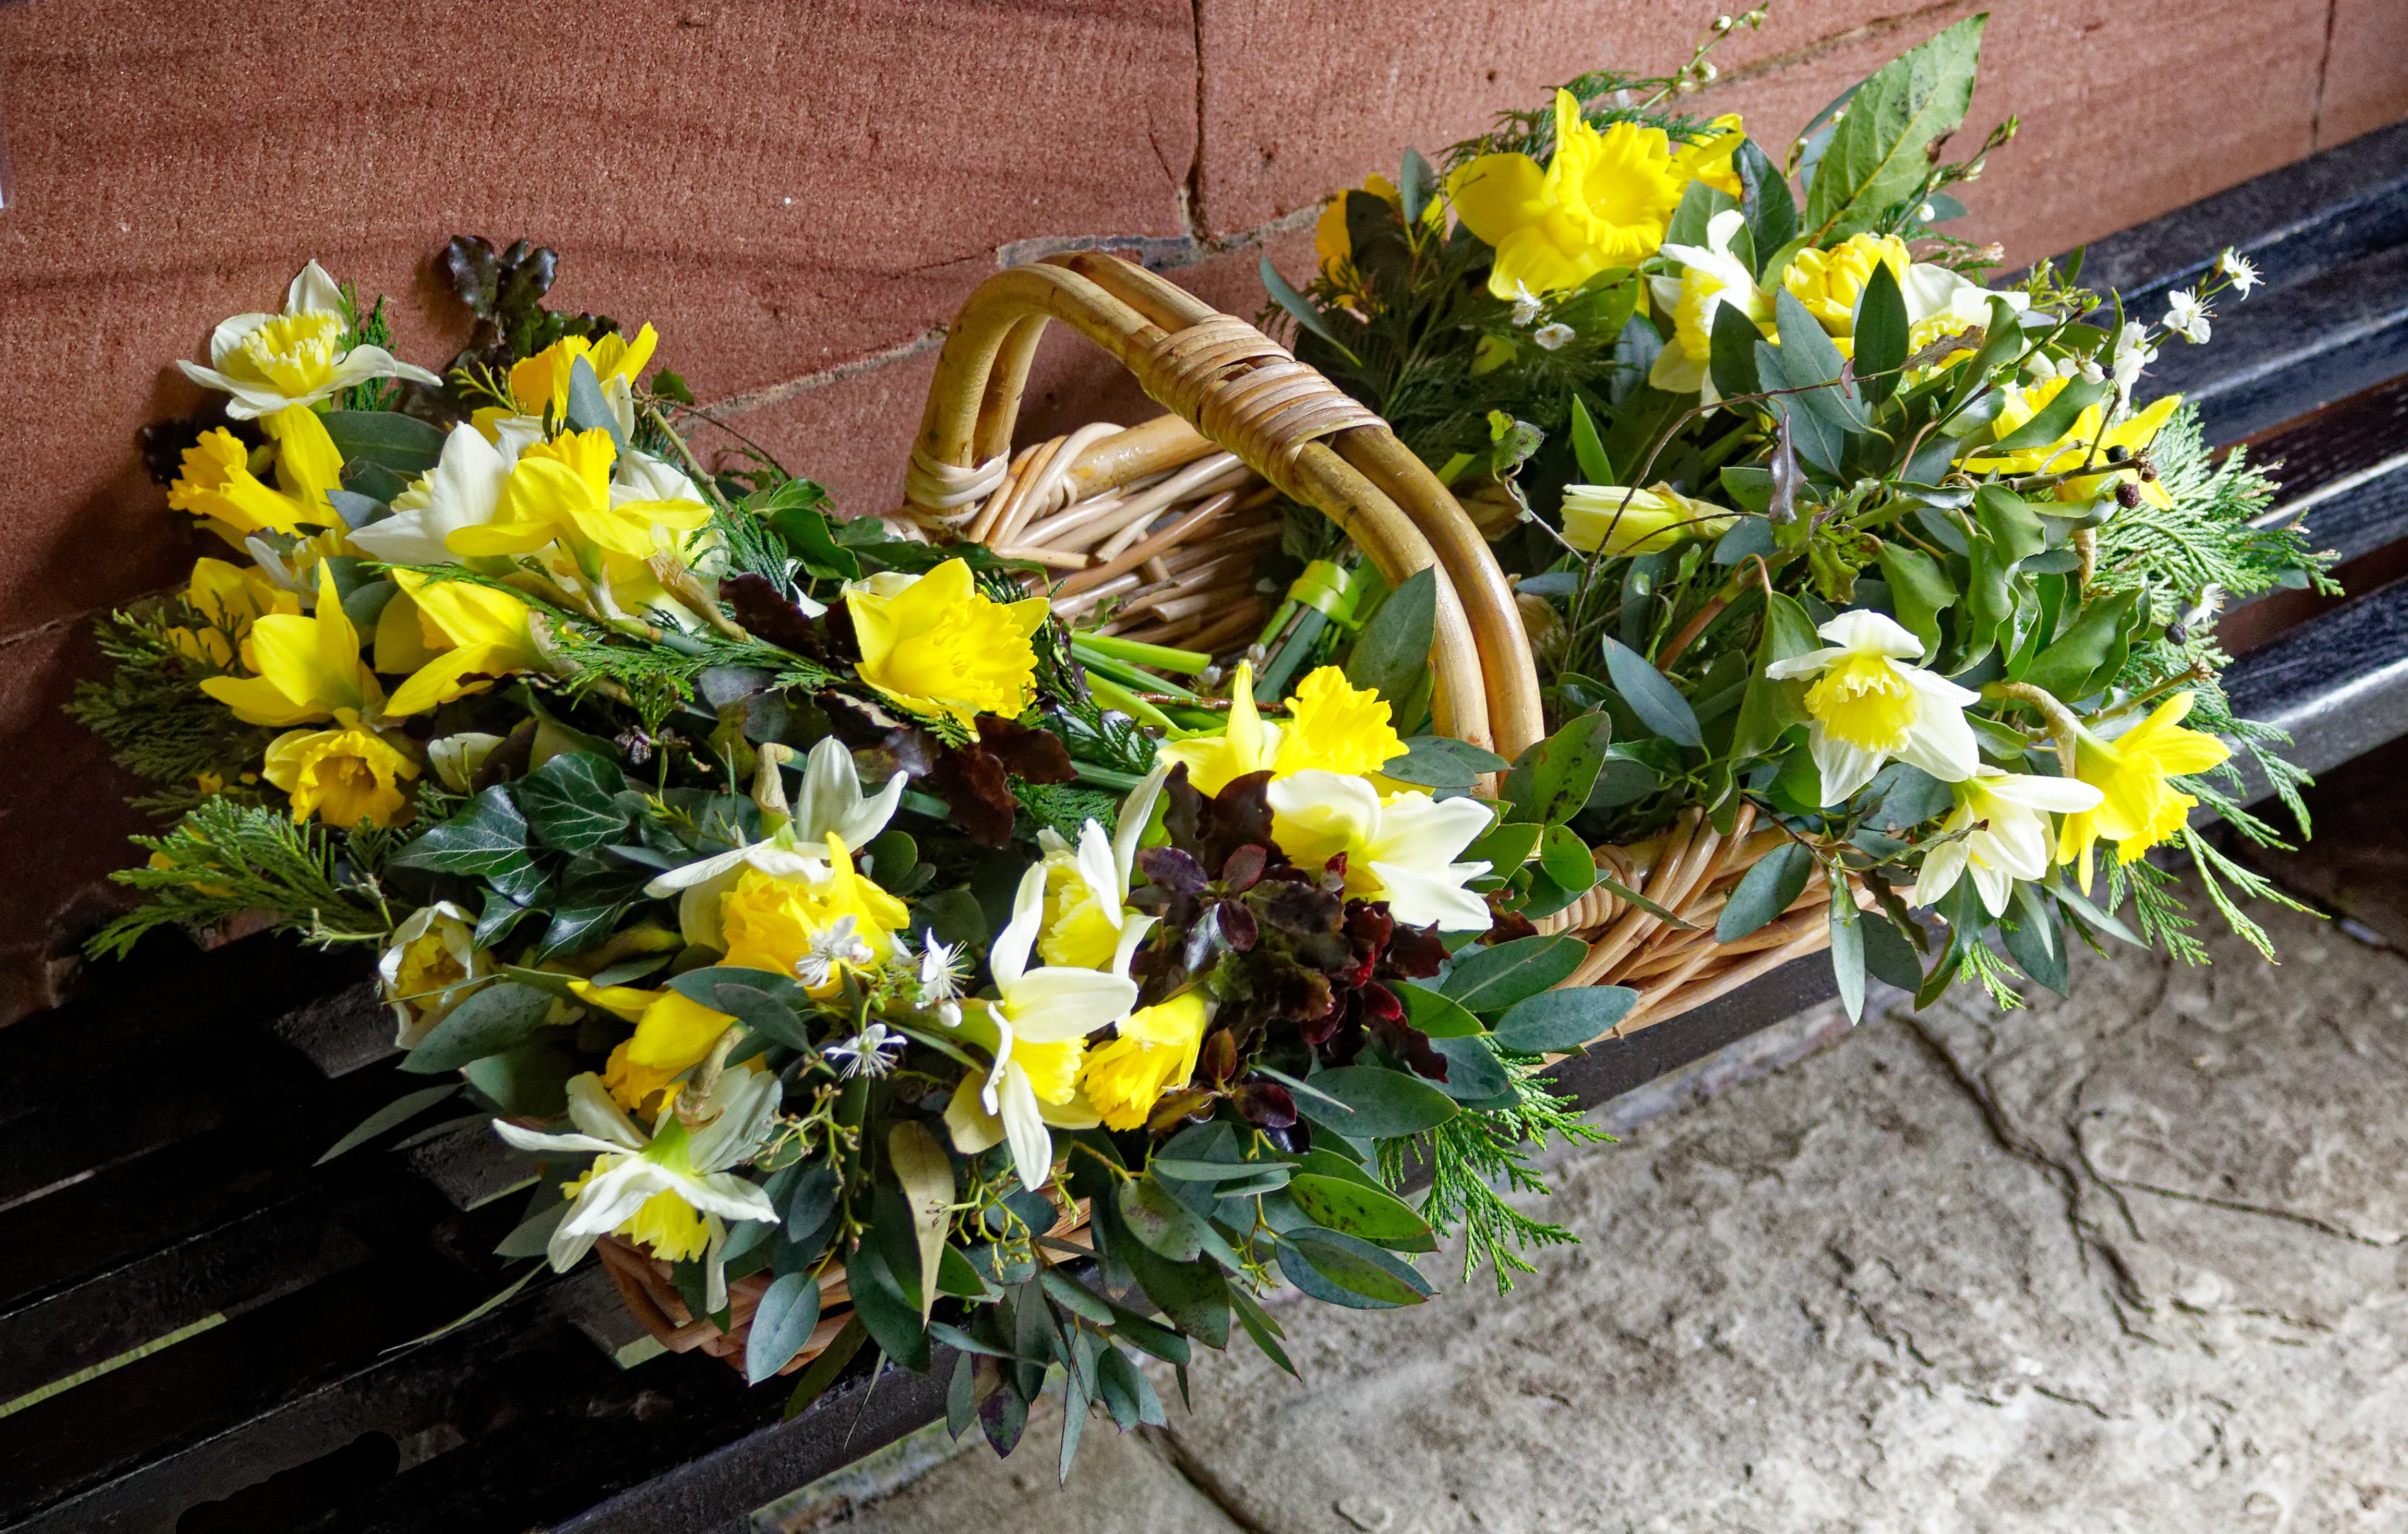 A basket of spring flowers in the church porch.